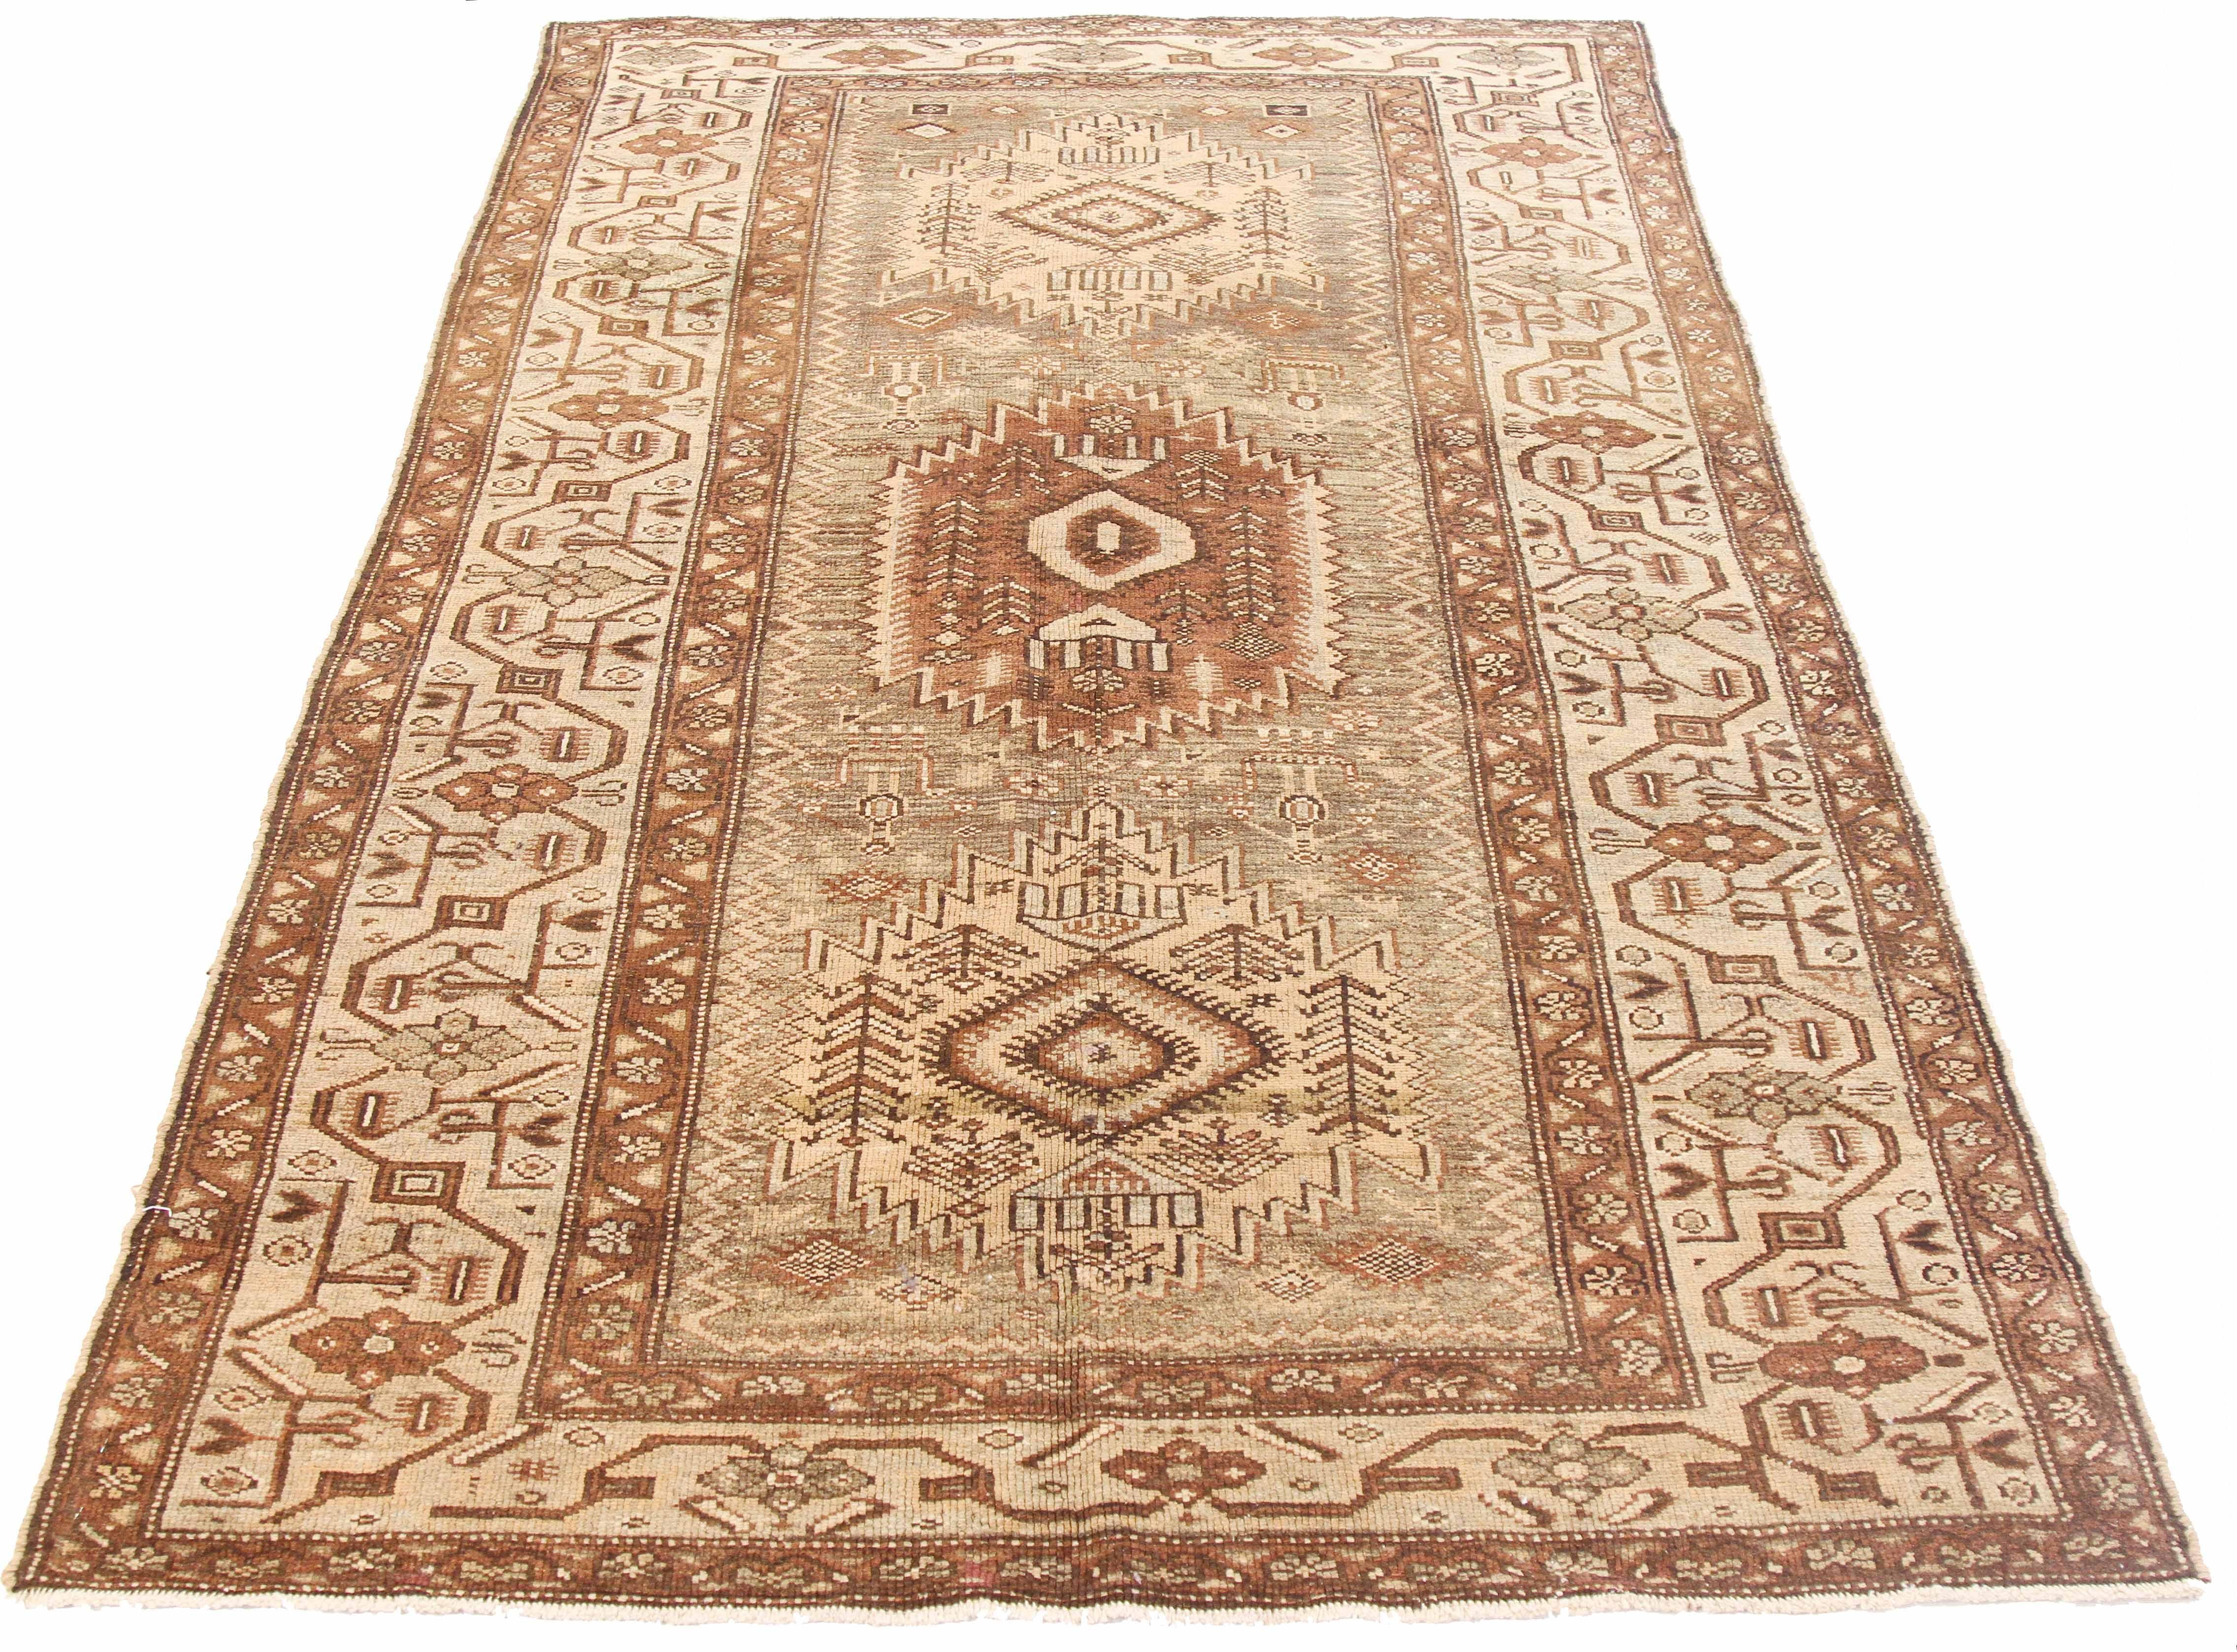 Antique Persian rug handwoven from the finest sheep’s wool and colored with all-natural vegetable dyes that are safe for humans and pets. It’s a traditional Khamseh design featuring large brown and beige tribal central medallions on an ivory field.